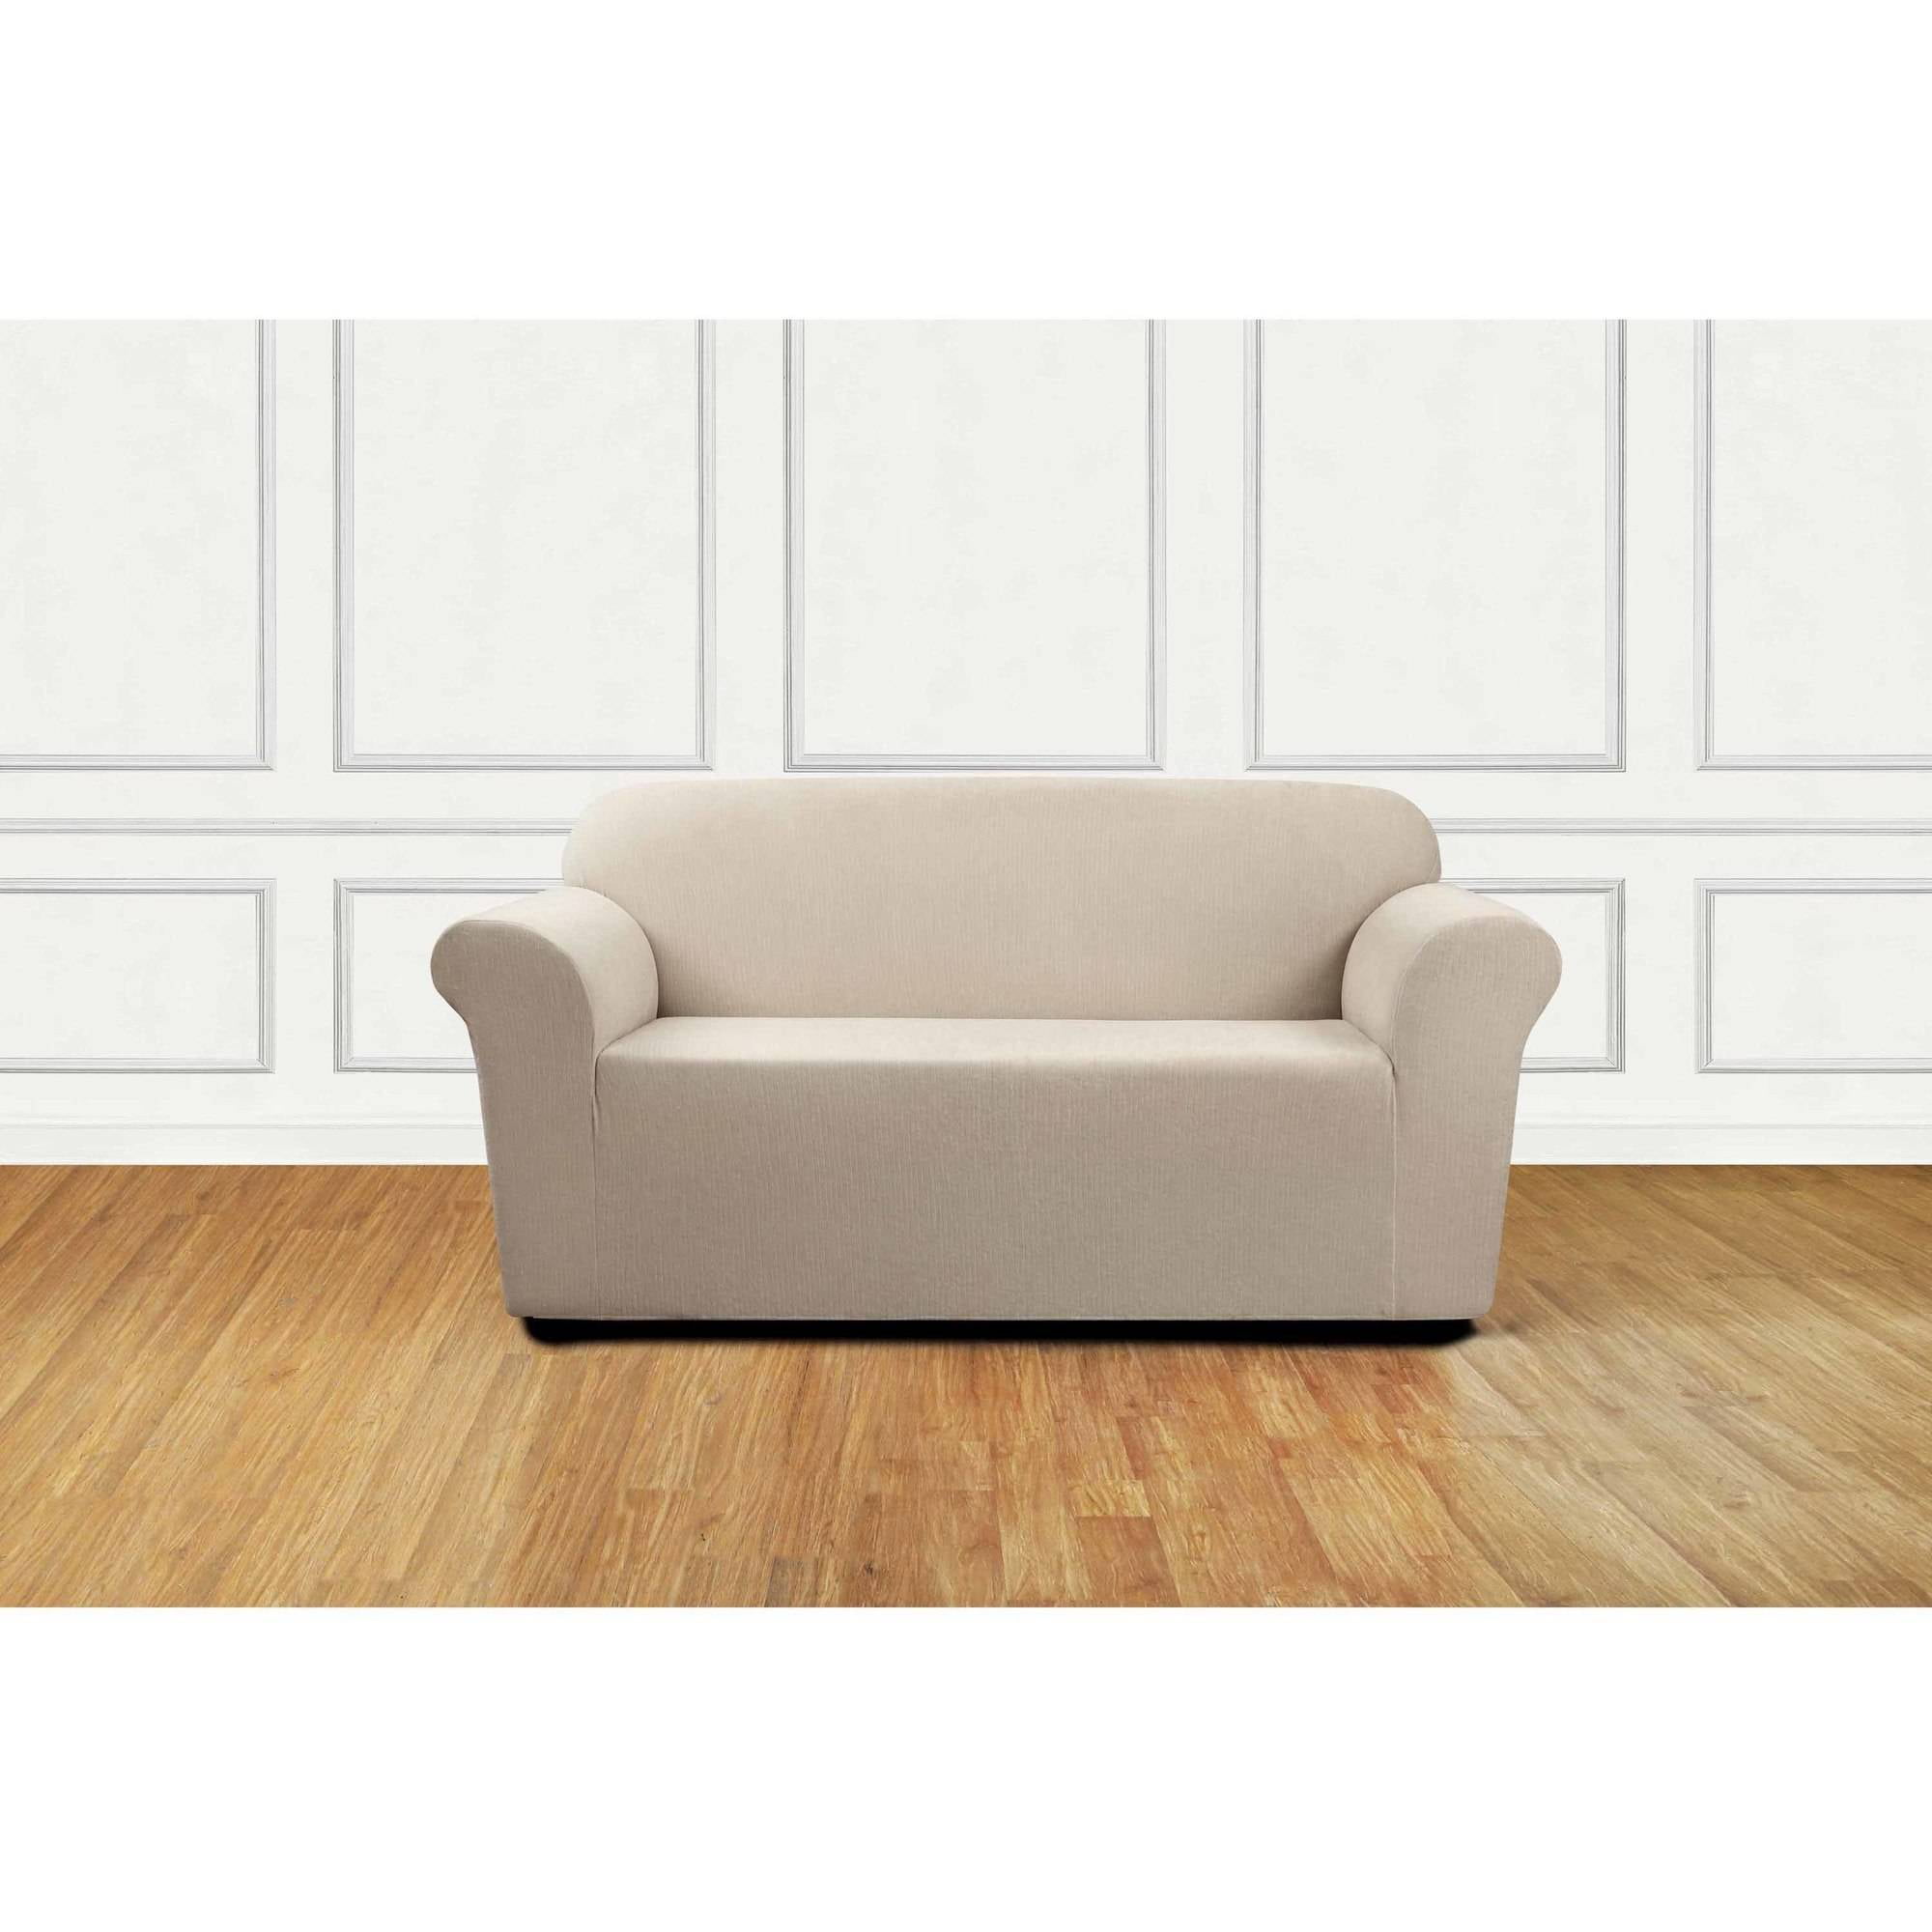 NEW Ultimate Stretch Chenille Slipcover by sure fit loveseat size Tan Beige 